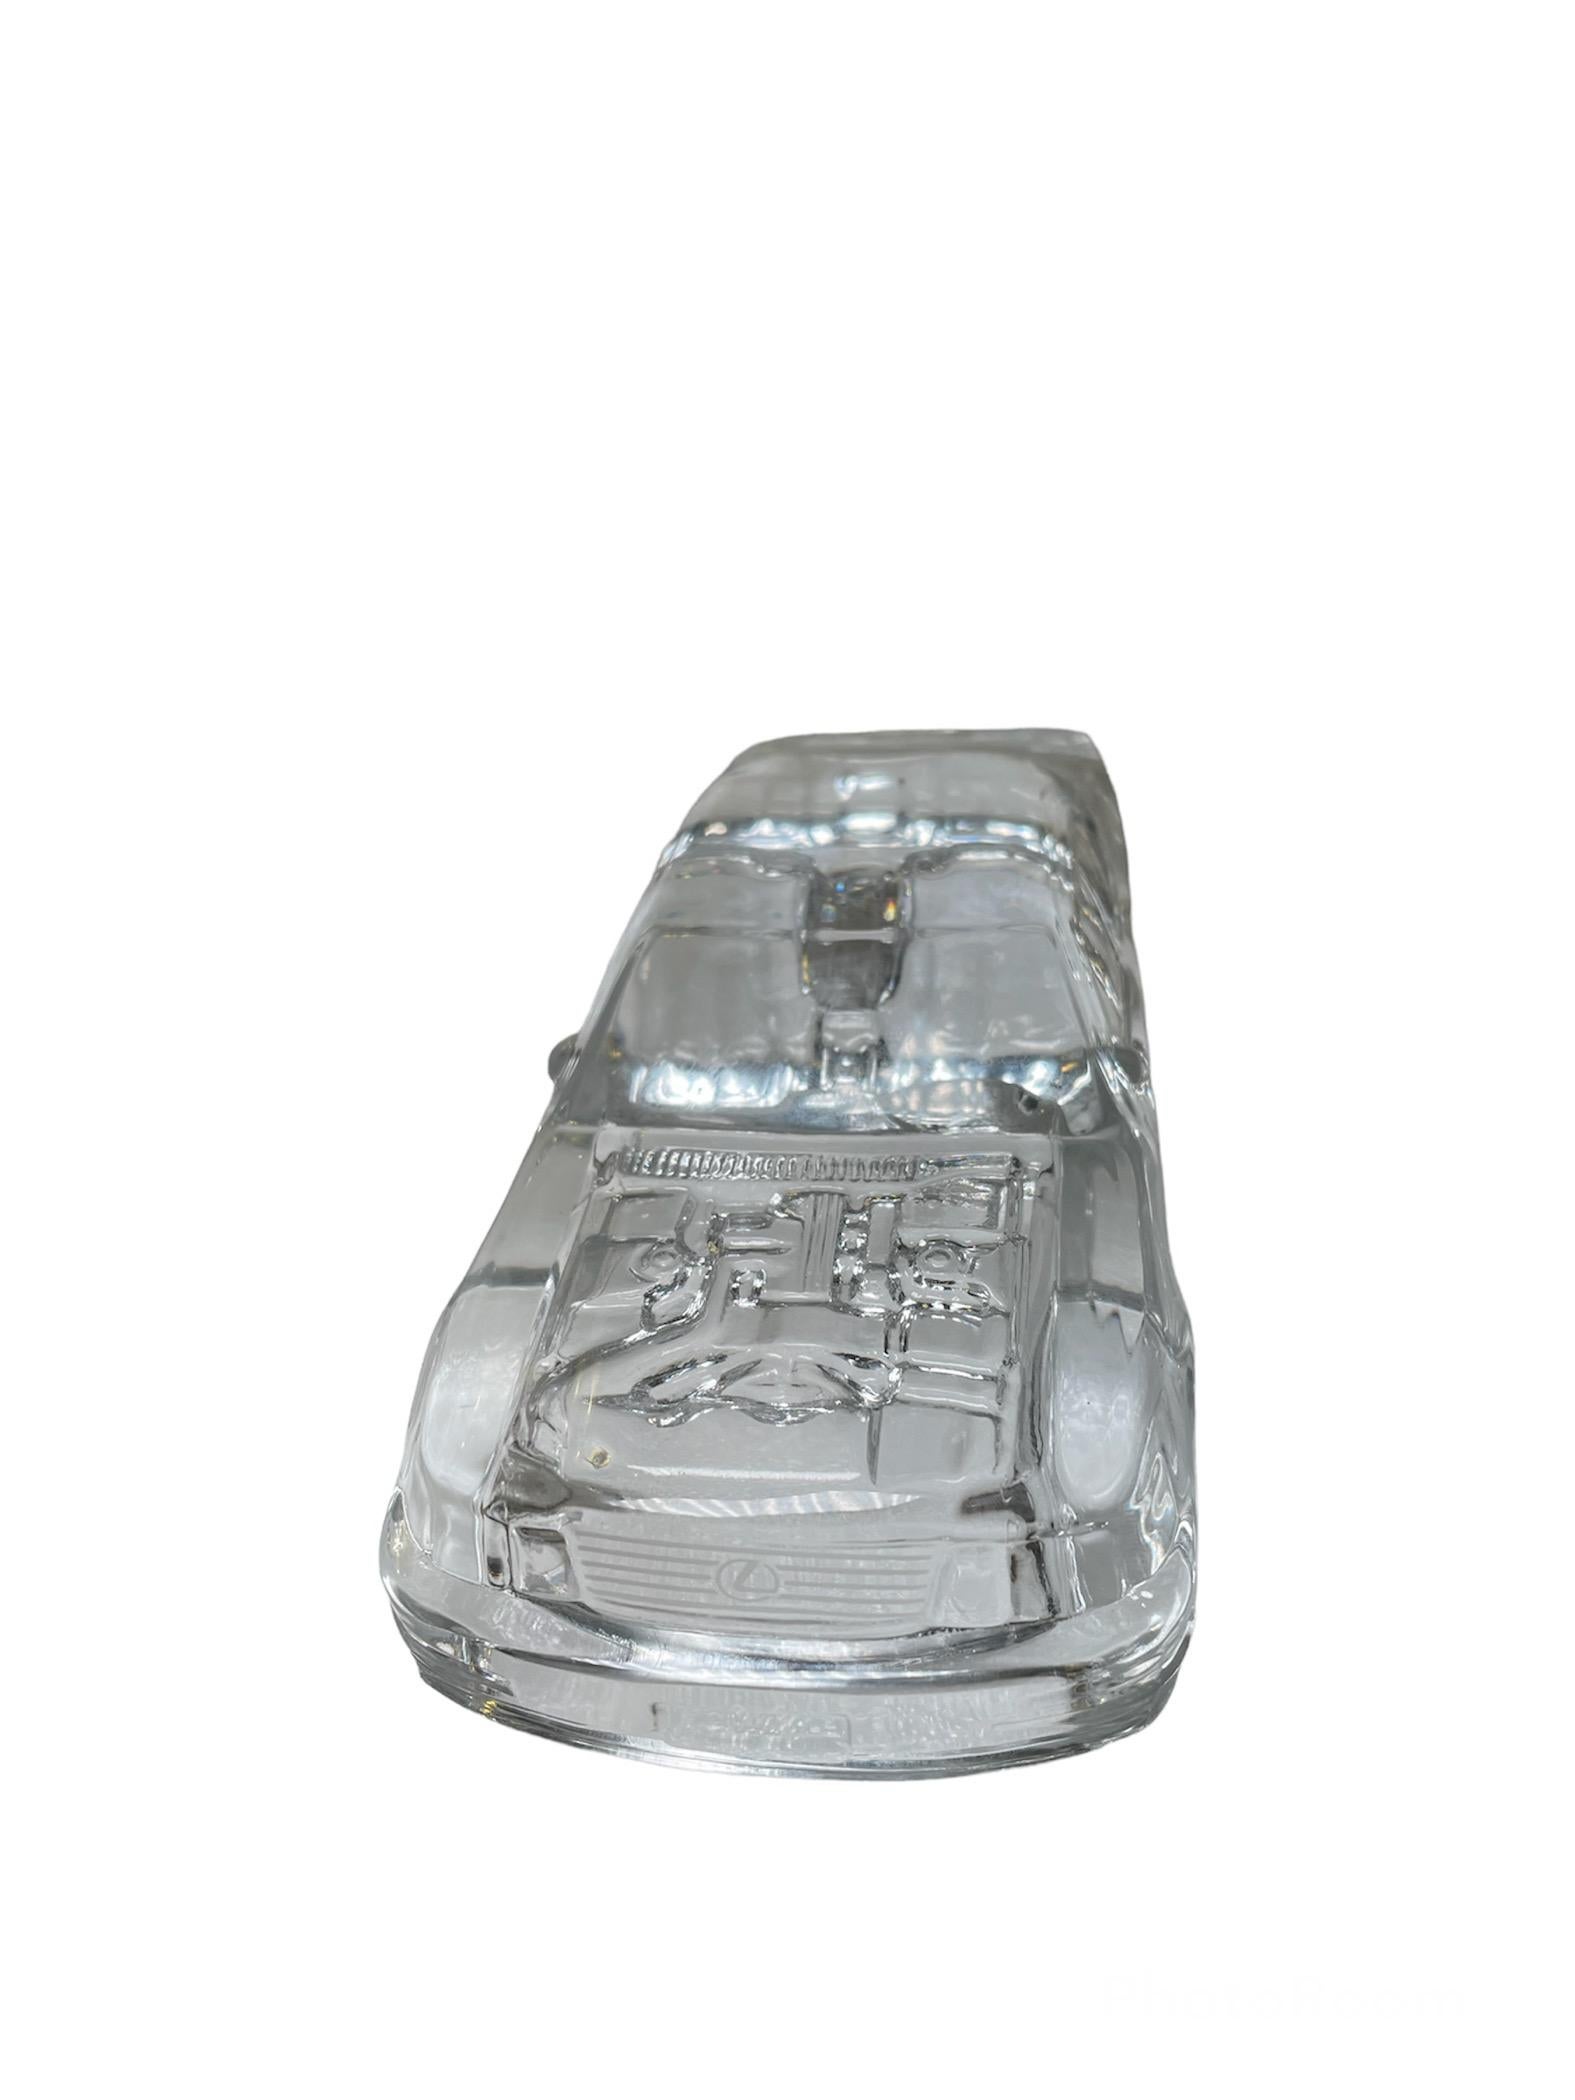 1989-90’s Clear Crystal Lexus LS 400 Car Paperweight For Sale 3